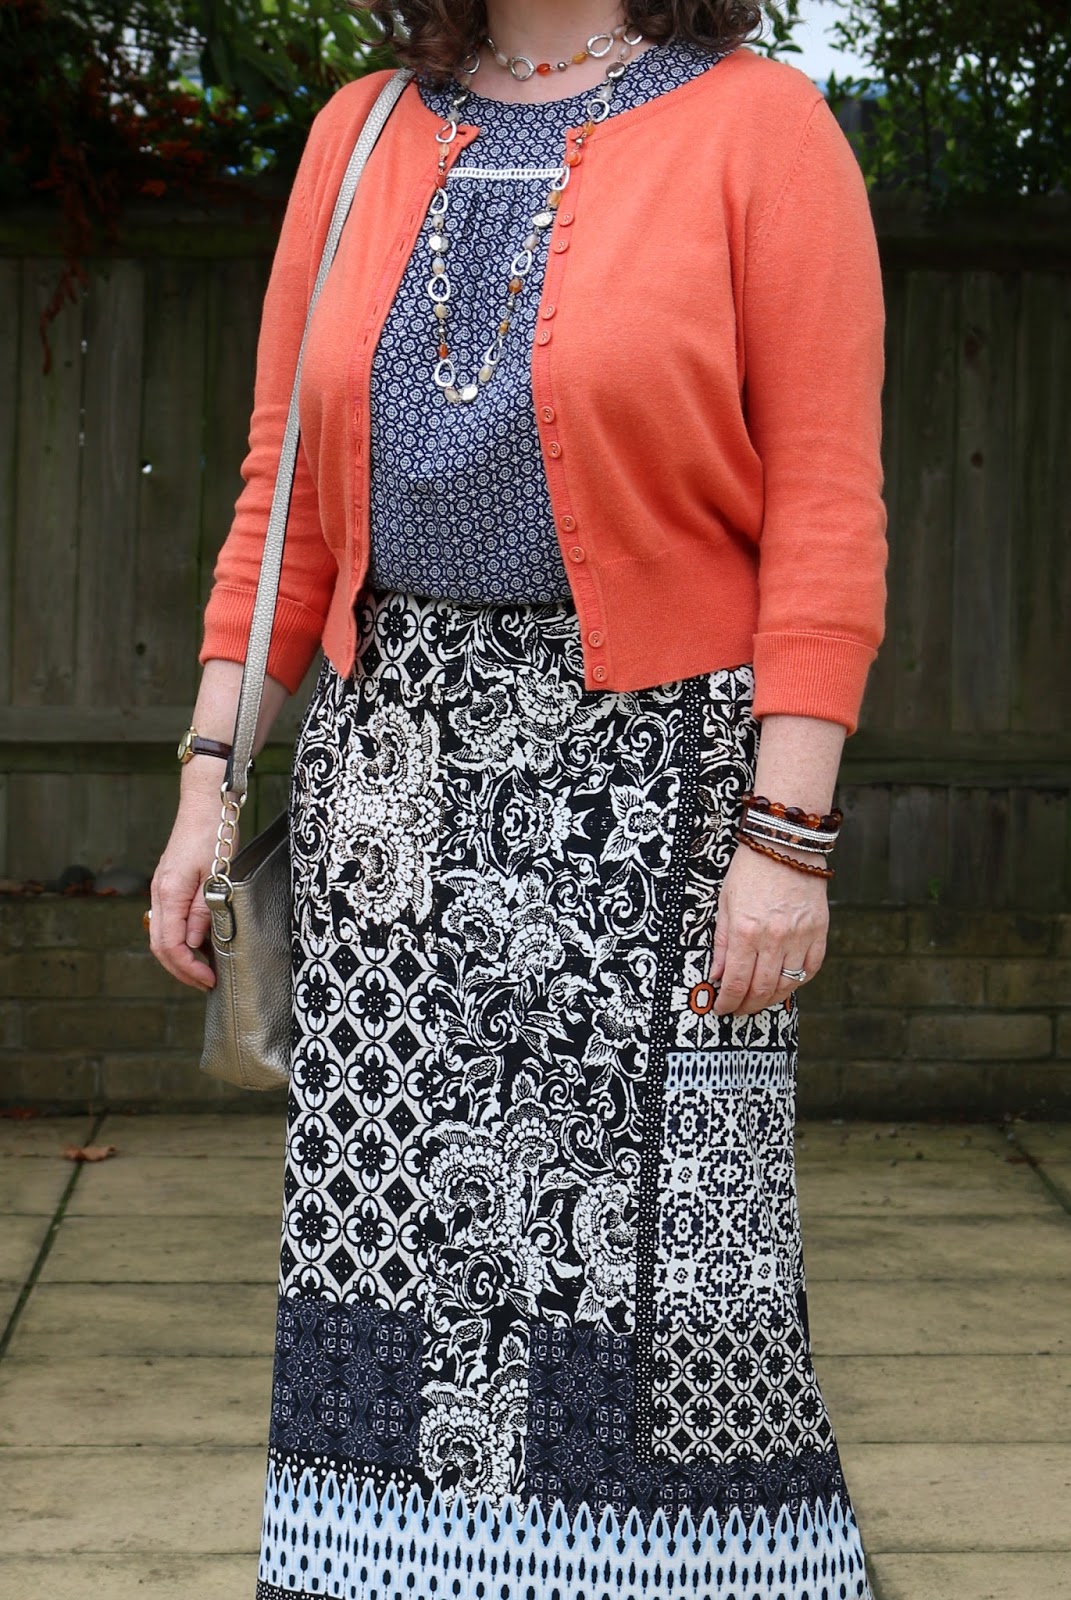 How to style your maxi skirt for Autumn, Pattern Mixing | Petite Silver Vixen